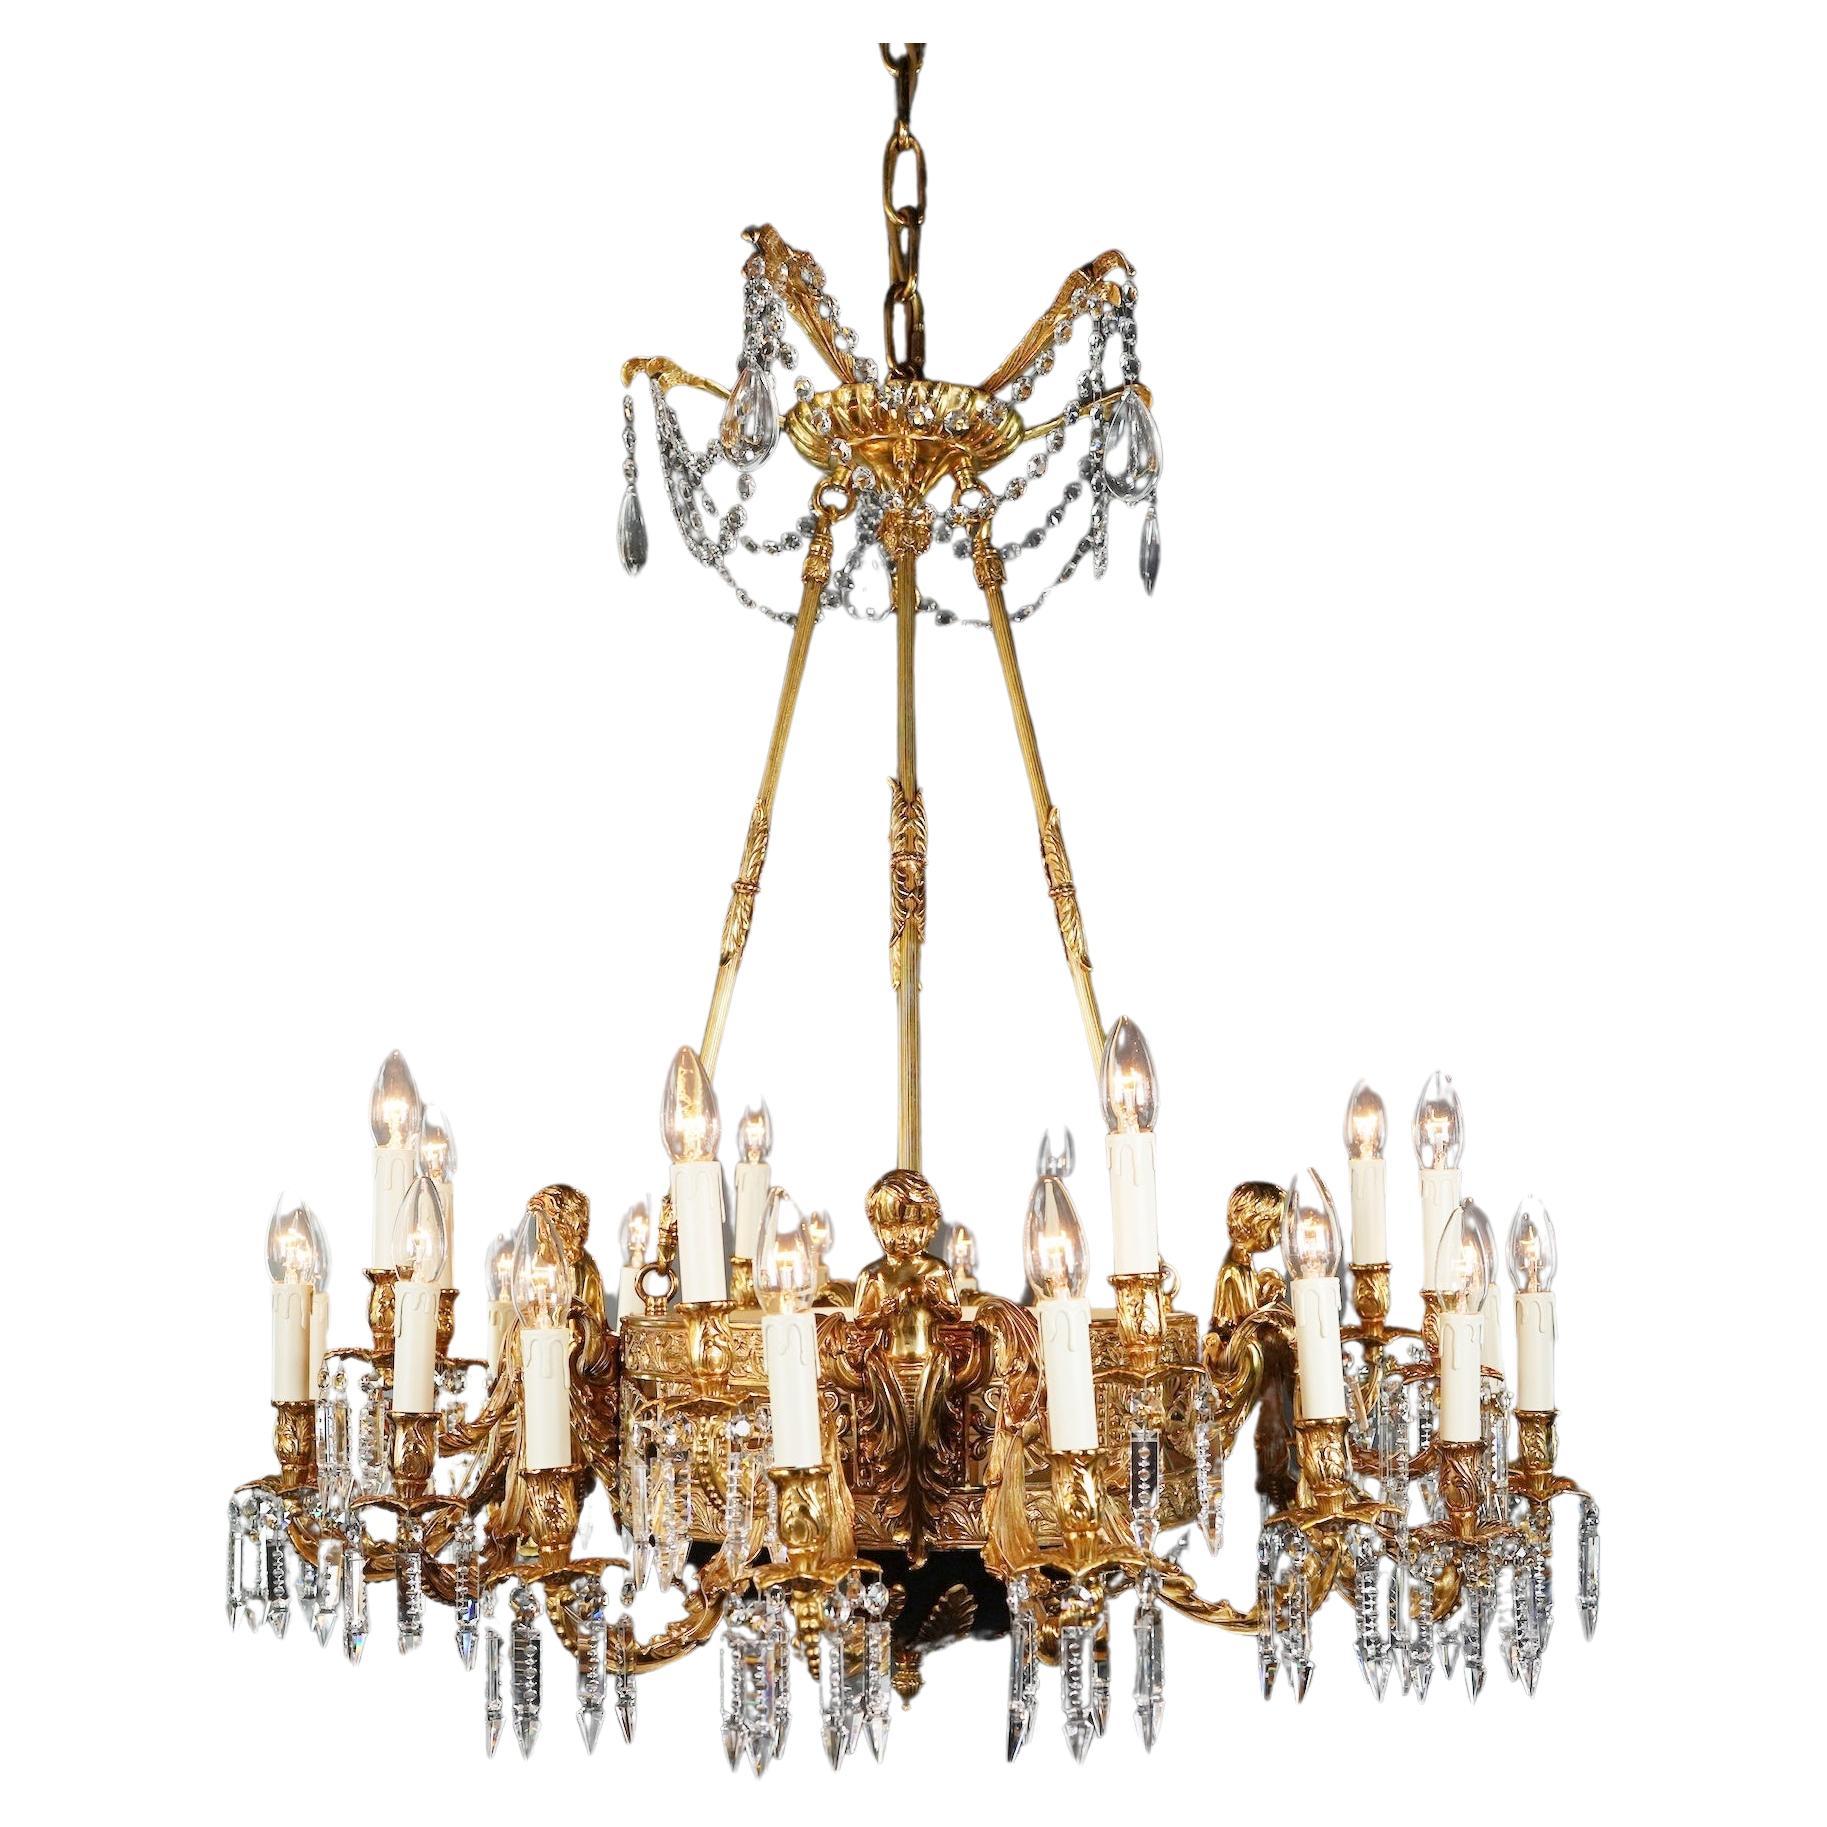 Putto Brass Empire Chandelier Lustre Lamp Antique Gold For Sale